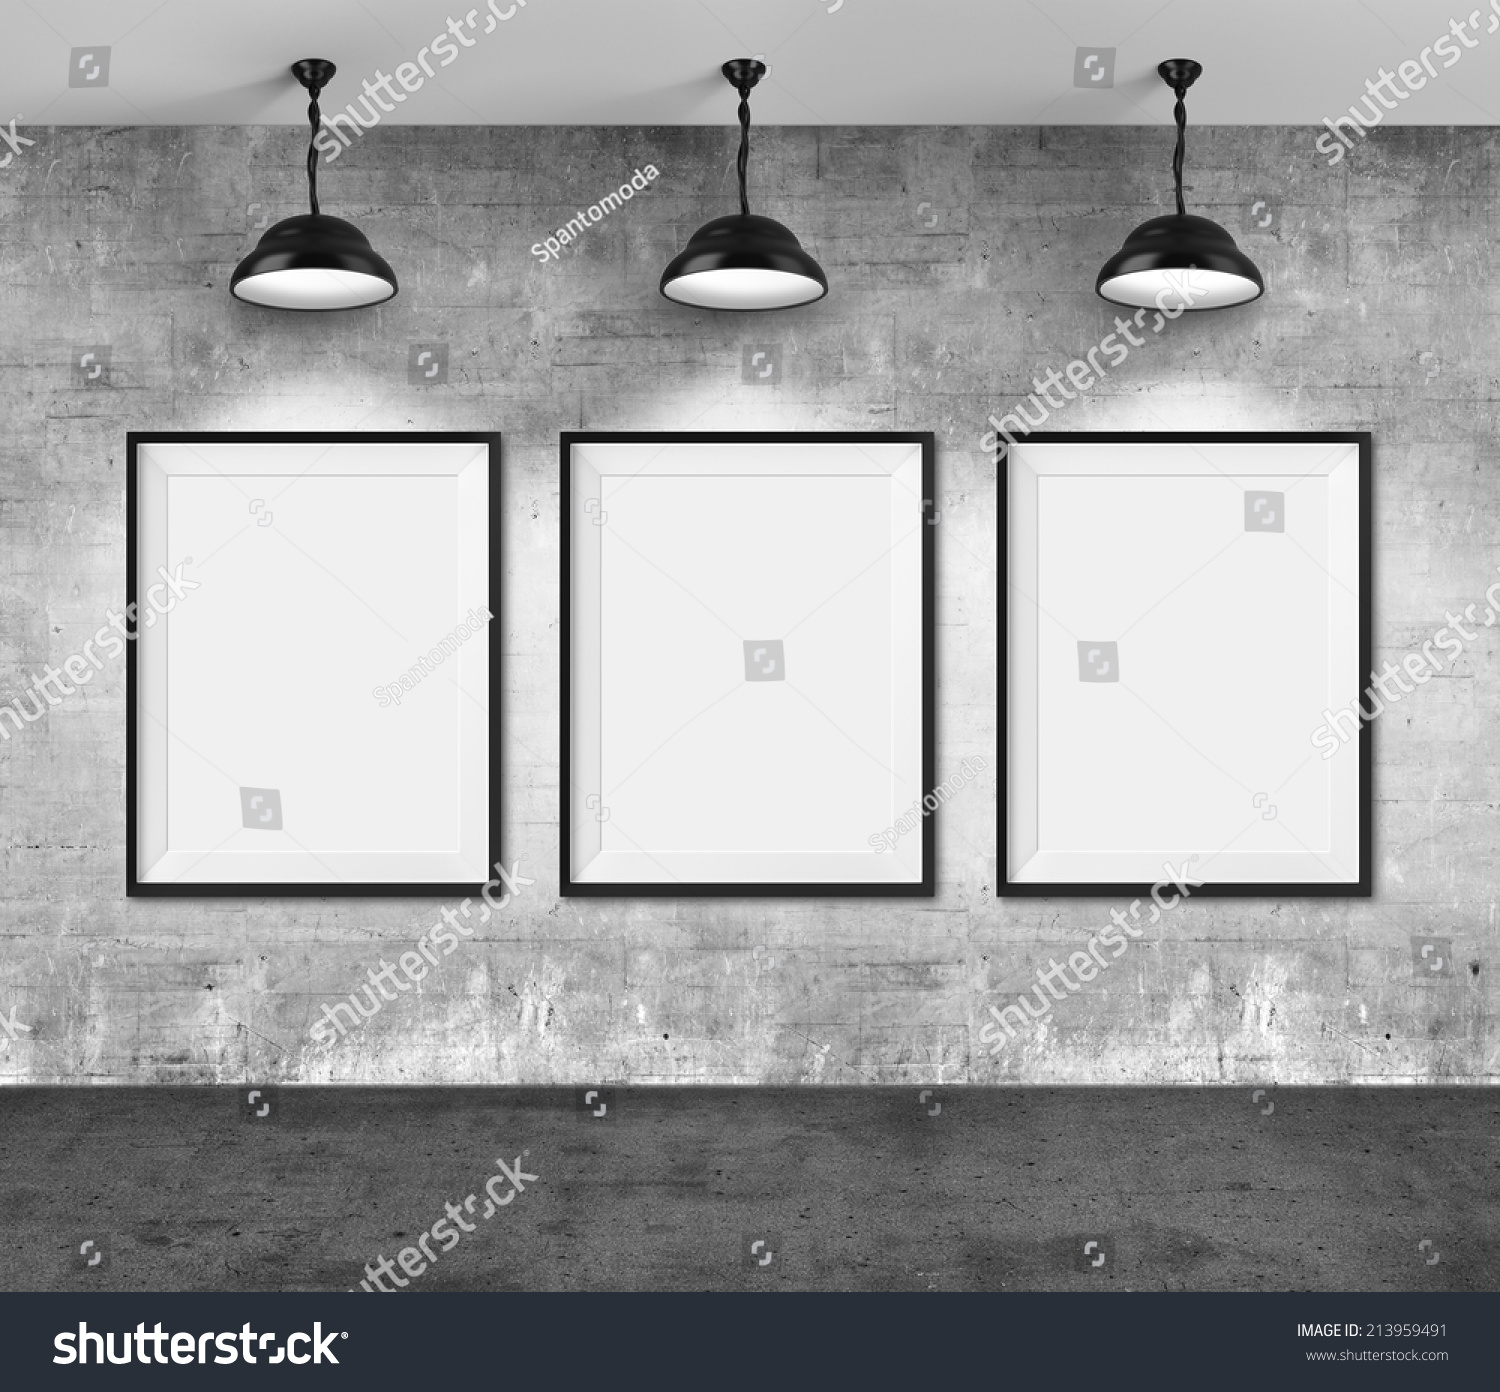 Art Gallery. Blank Picture Frames On Grunge Wall Background. Stock ...